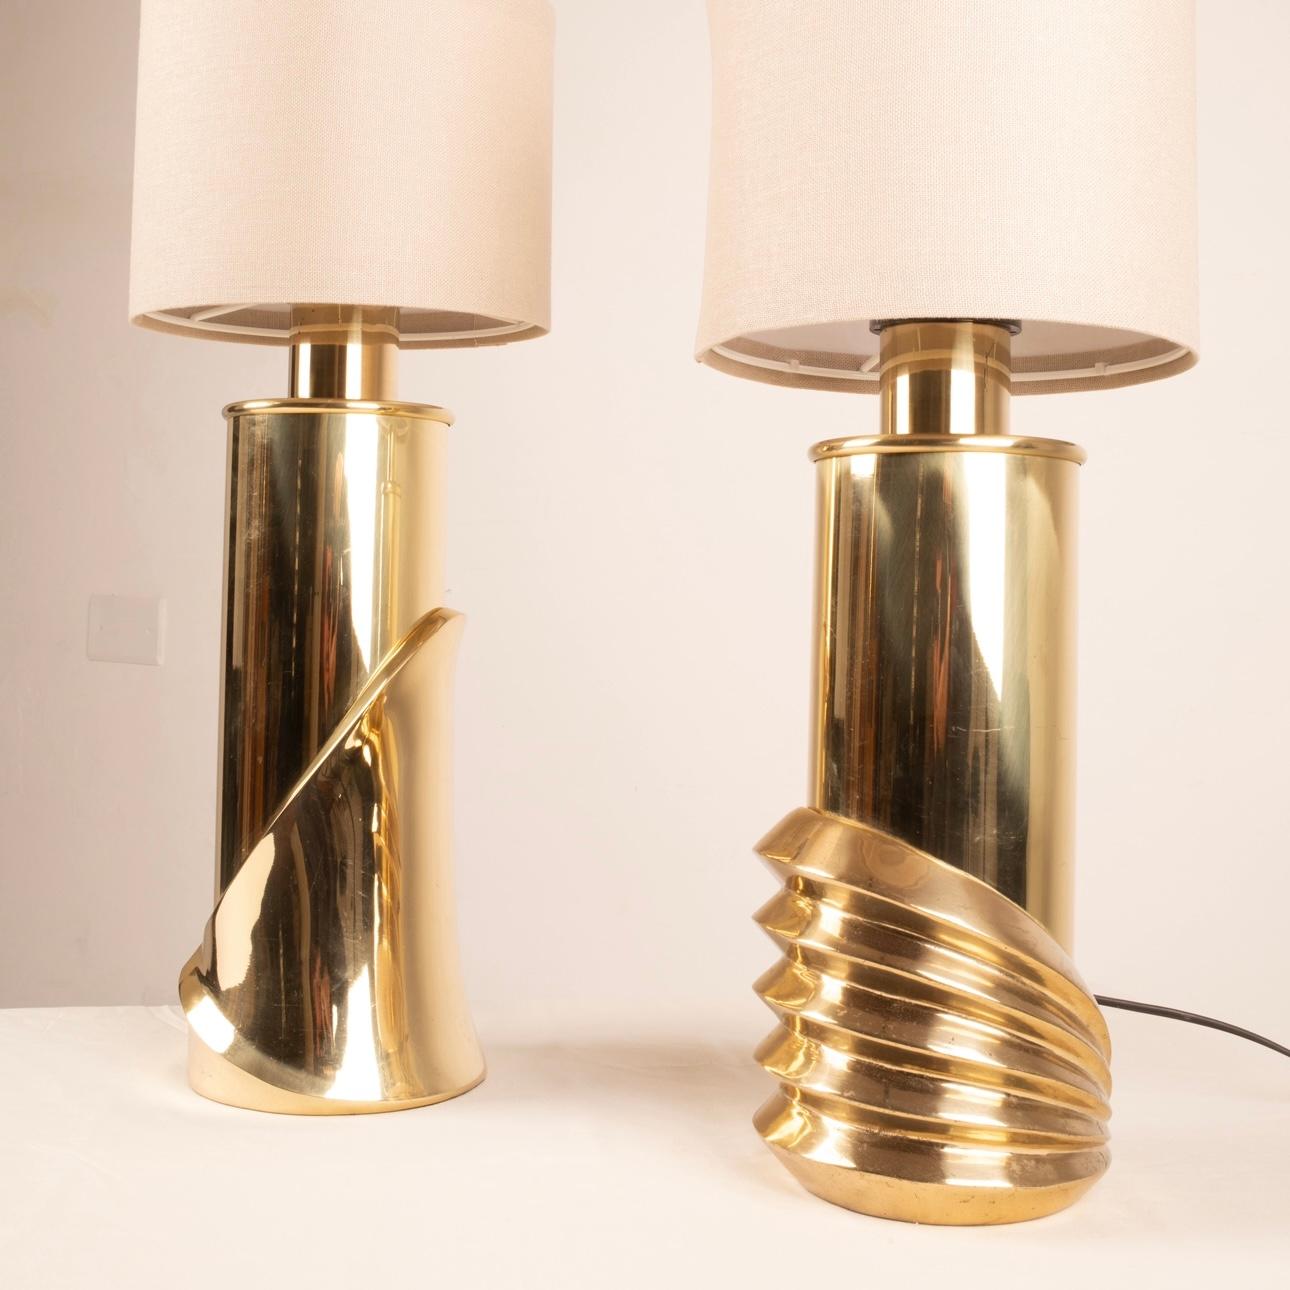 Brutalist Pair of Brass Lamps by Luciano Frigerio for Frigerio of Desio For Sale